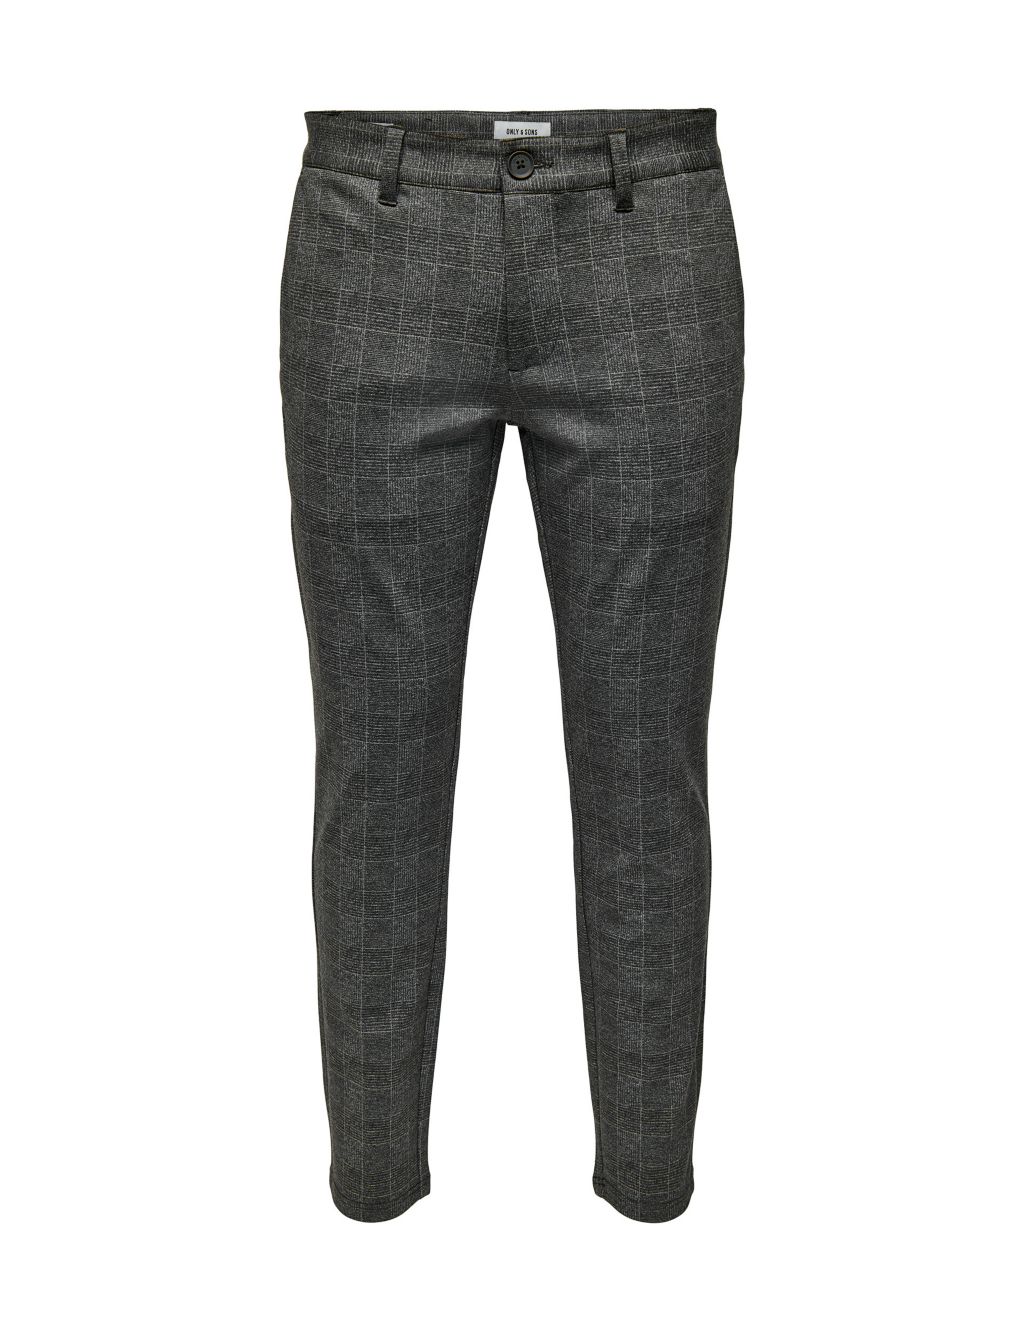 Tapered Fit Checked Trousers image 2